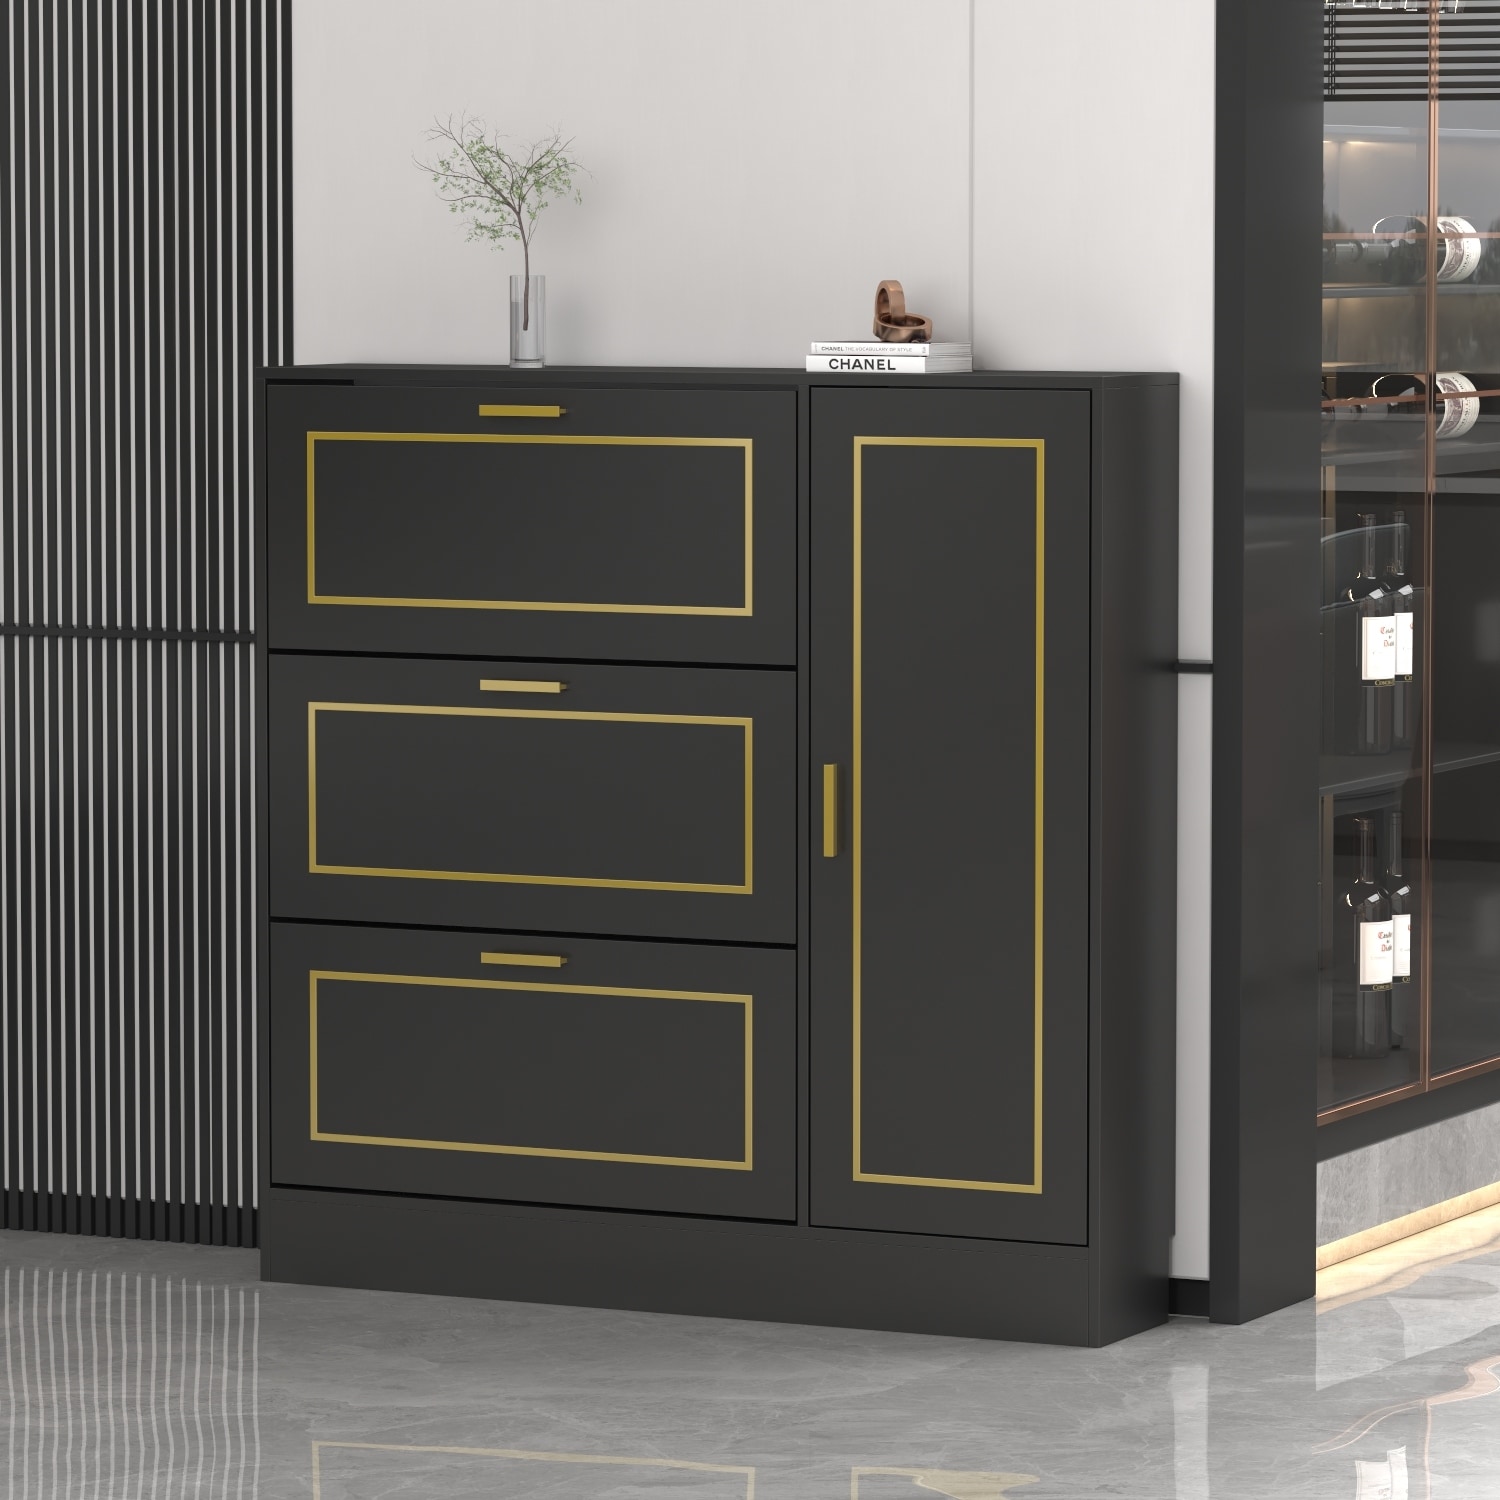 3 Drawer Shoe Storage Cabinet with 1 Door Everly Quinn Finish: Black